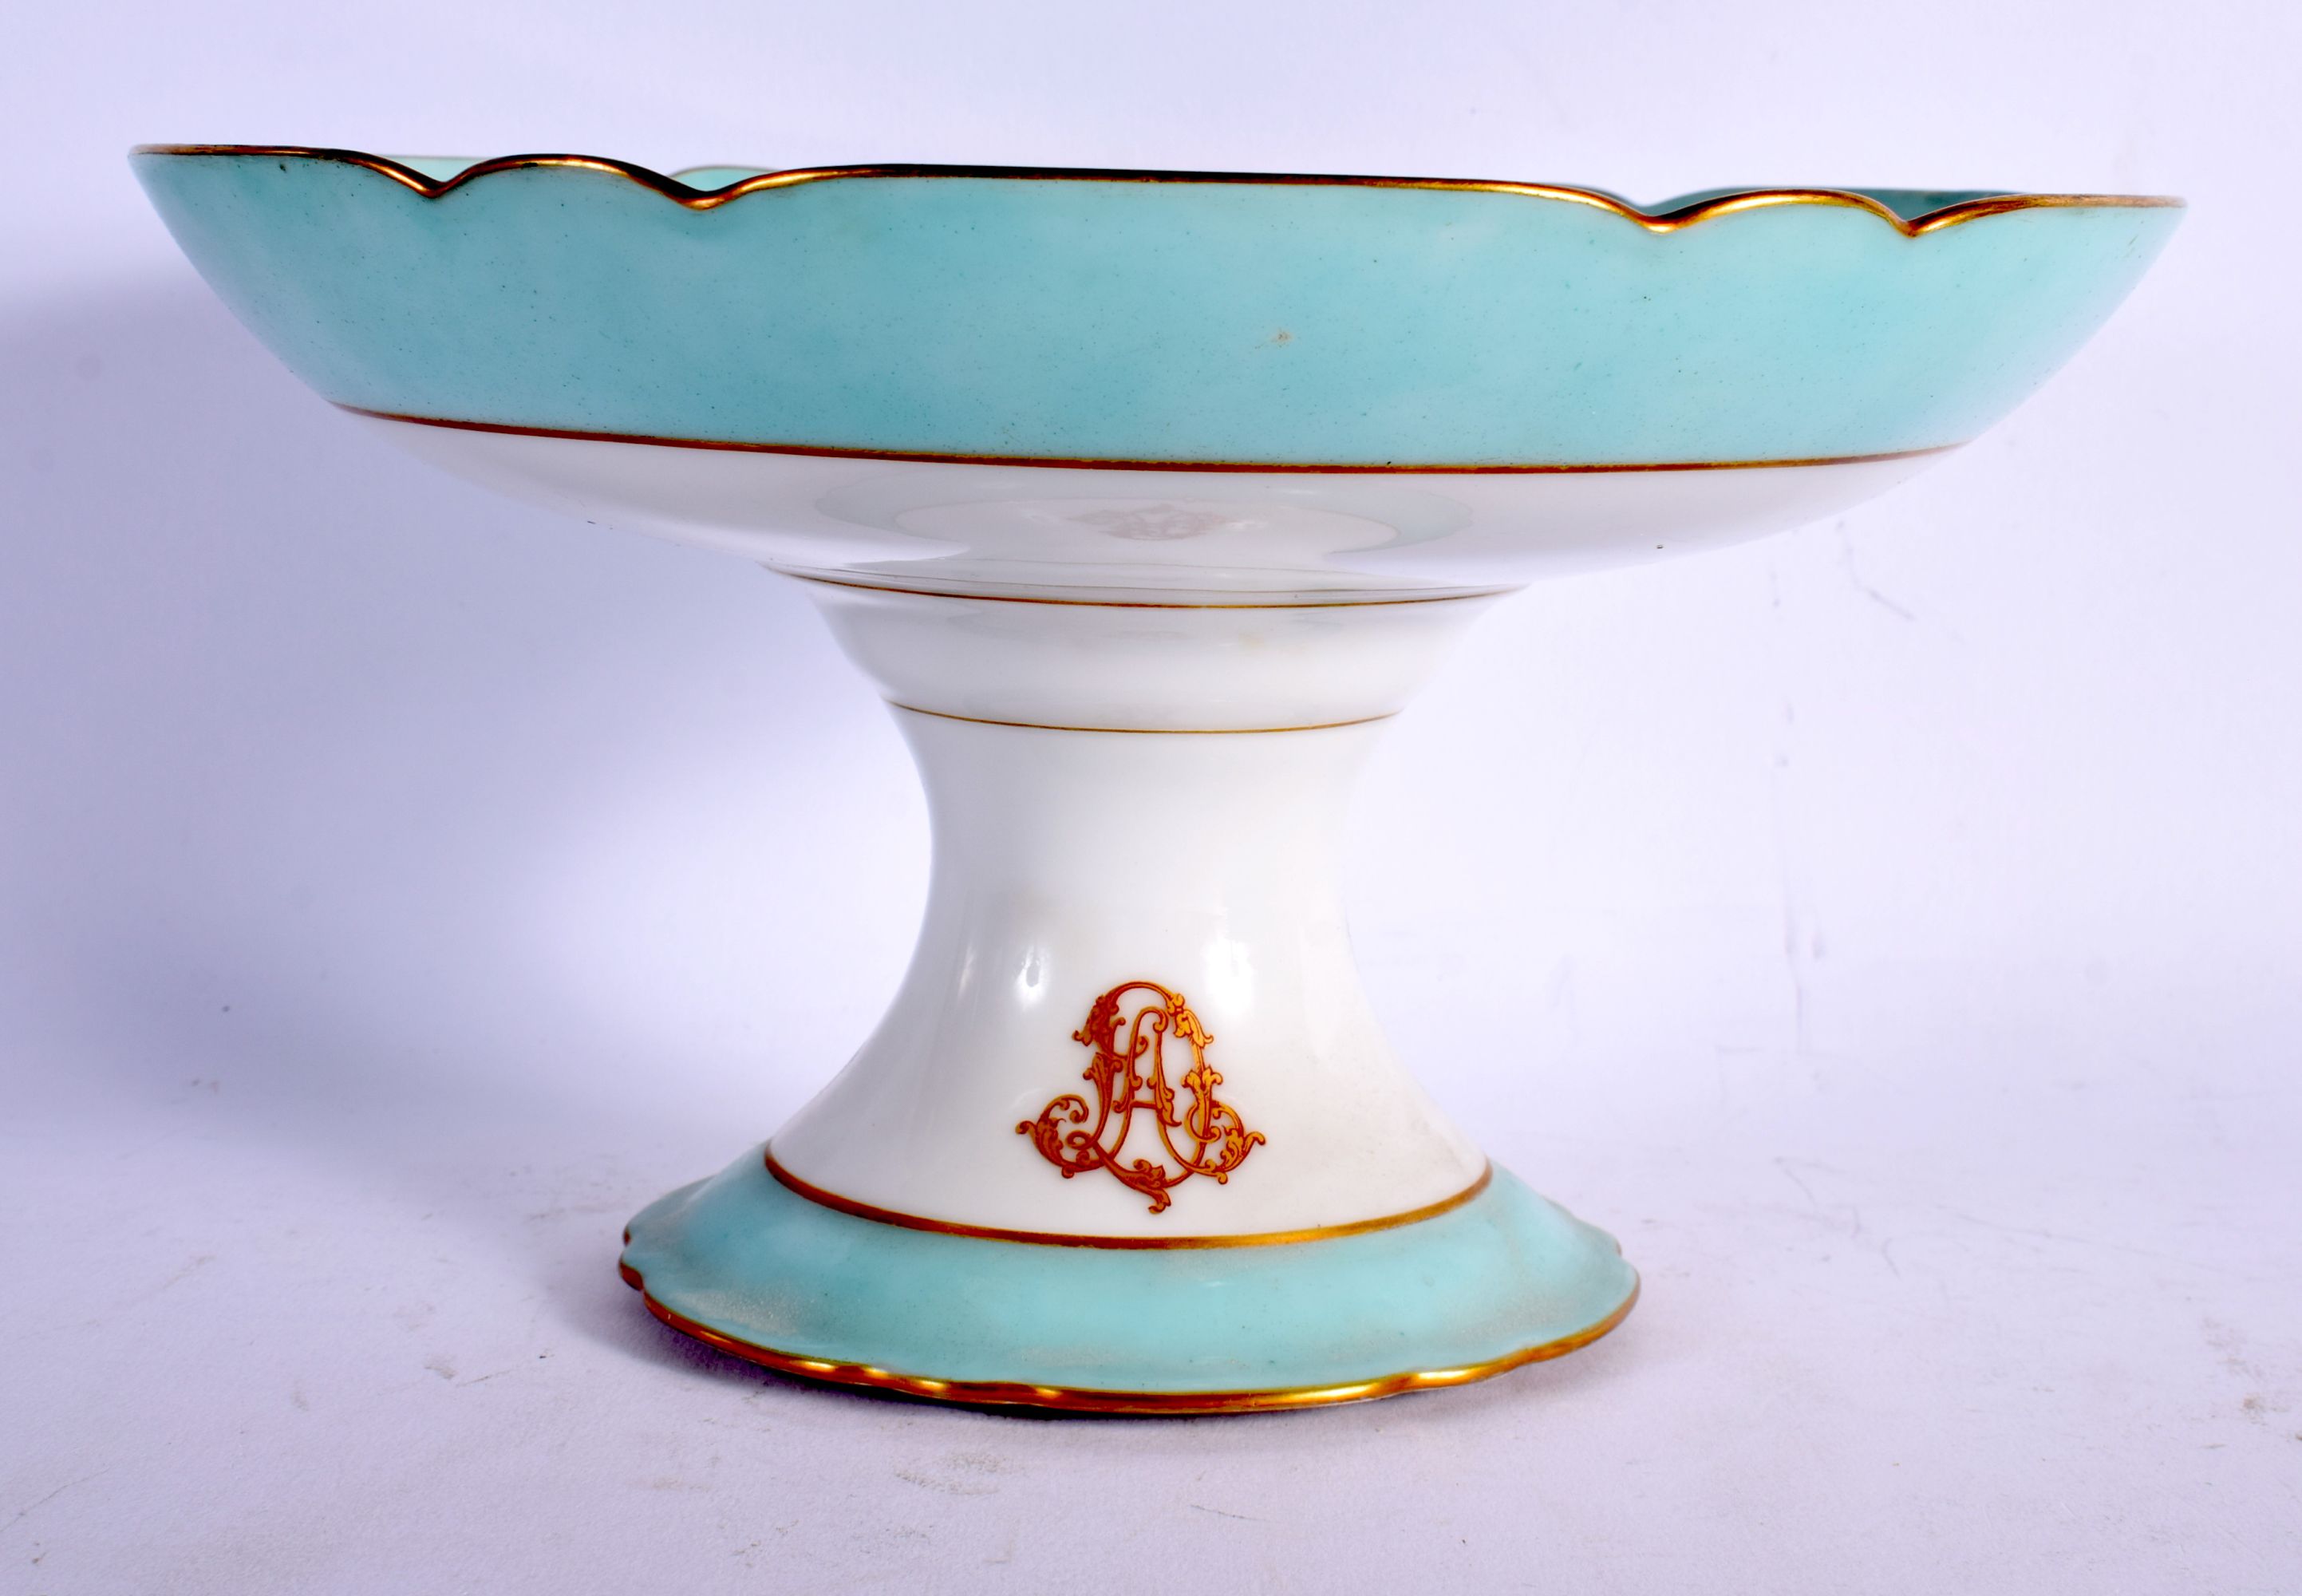 A LARGE AND EXTENSIVE LATE 19TH CENTURY FRENCH PORCELAIN DINNER SERVICE painted with a monogram. Lar - Image 2 of 14